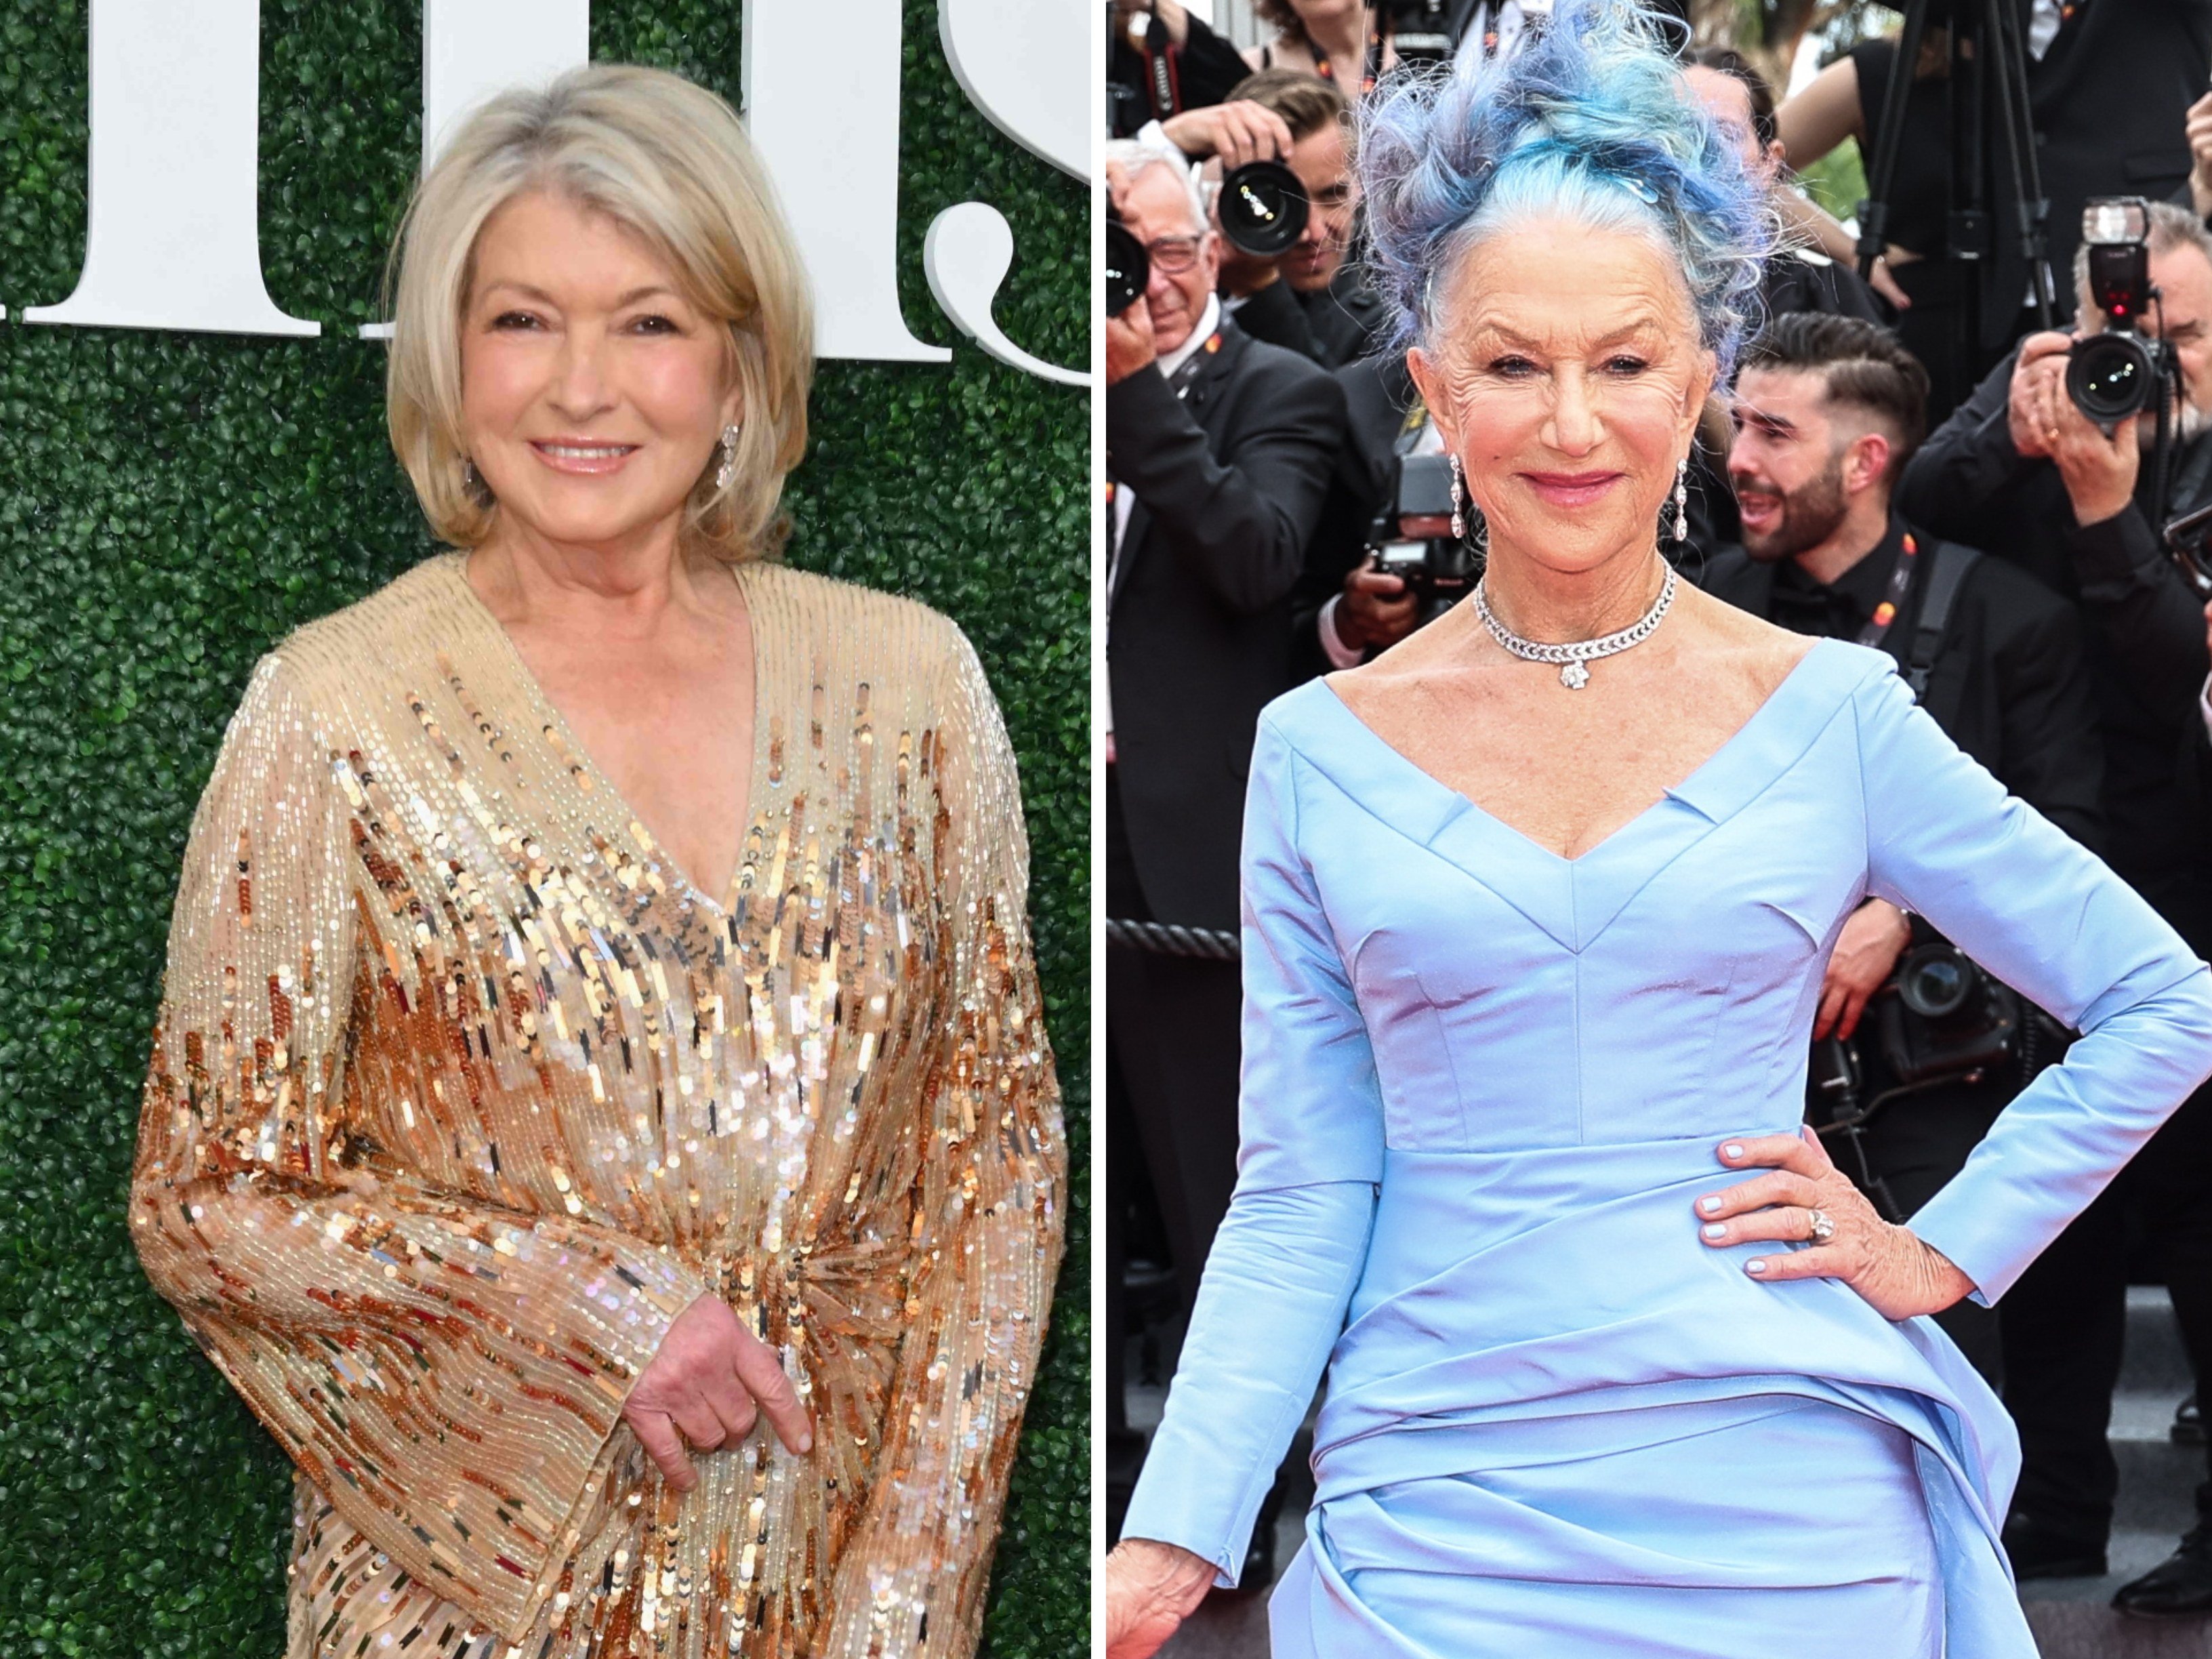 Martha Stewart and Helen Mirren looking fabulous on the red carpet at recent events. Photos: EPA/AFP